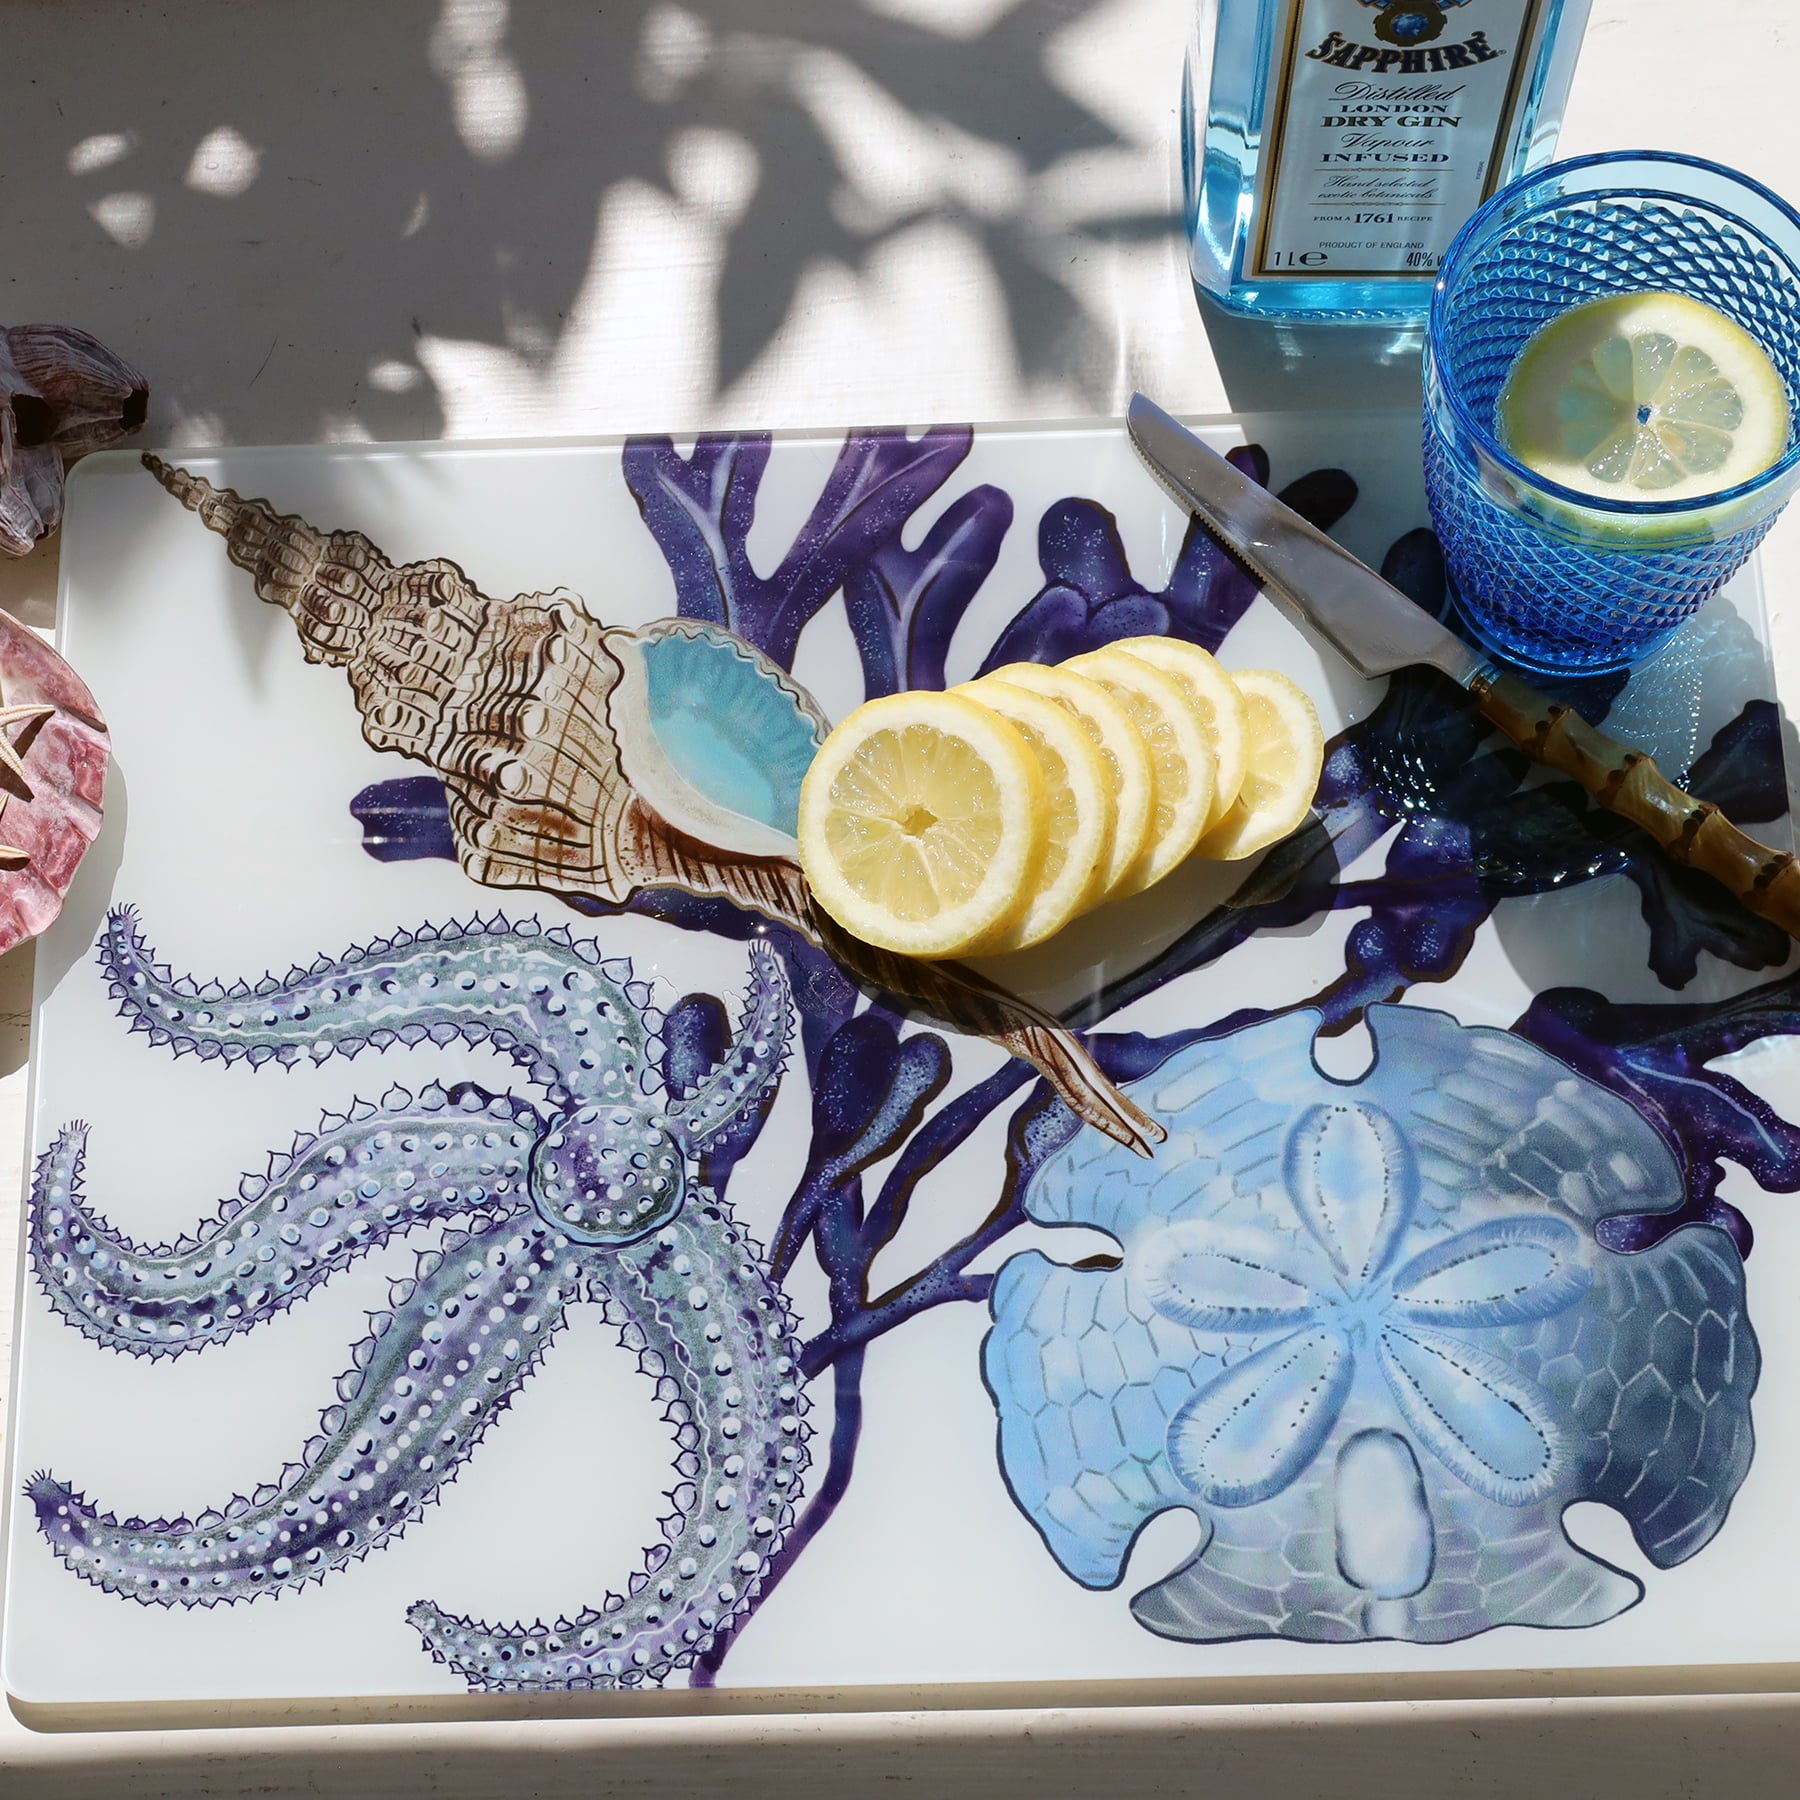 Glass worktop saver in our Beachcomber design with Starfish,a whelk,seaweed and a sand dollar design,placed on a table.On the worktop saver are sliced lemons,a knife and a glass of gin with the bottle behind it.